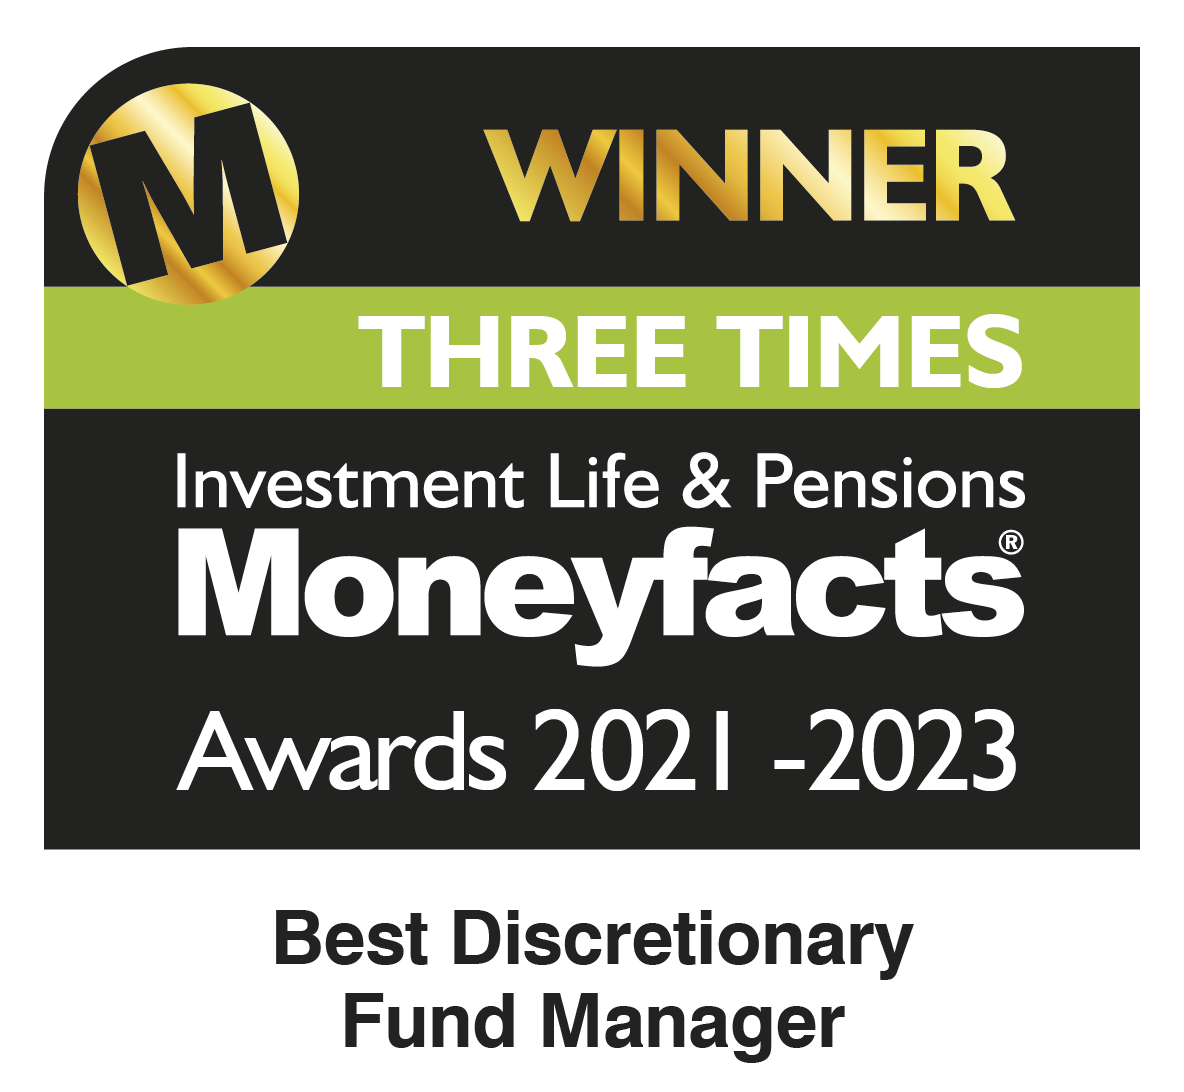 Moneyfacts Awards Best Discretionary Fund Manager award logo for 2021, 2022 and 2023